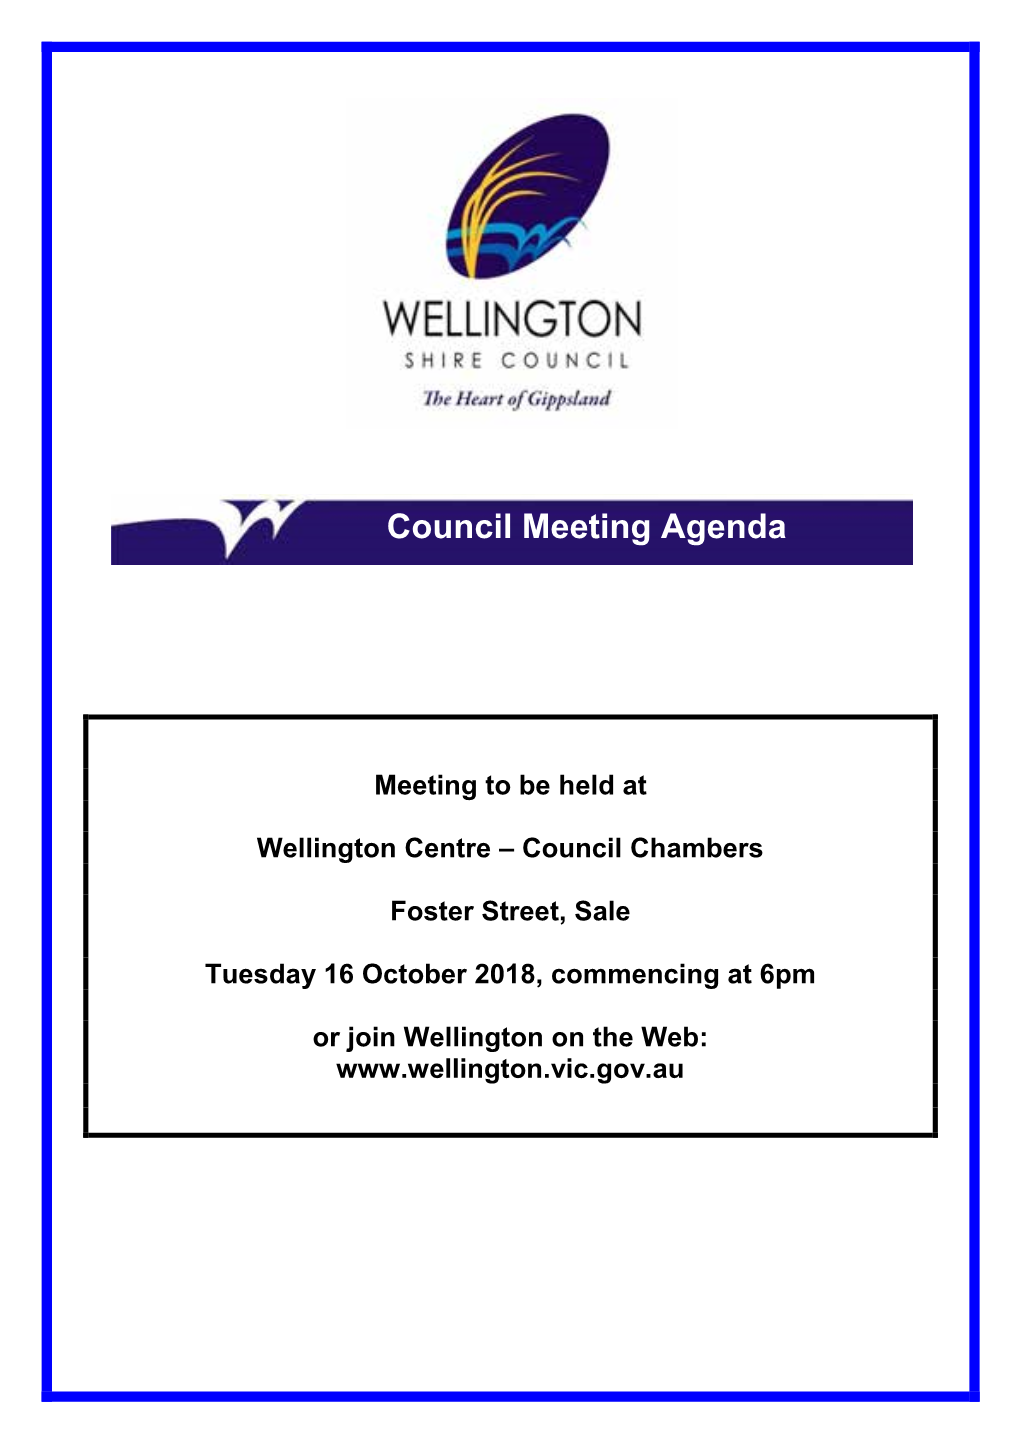 Wellington Shire Council, Its Councillors, Officers, Staff and Their Families